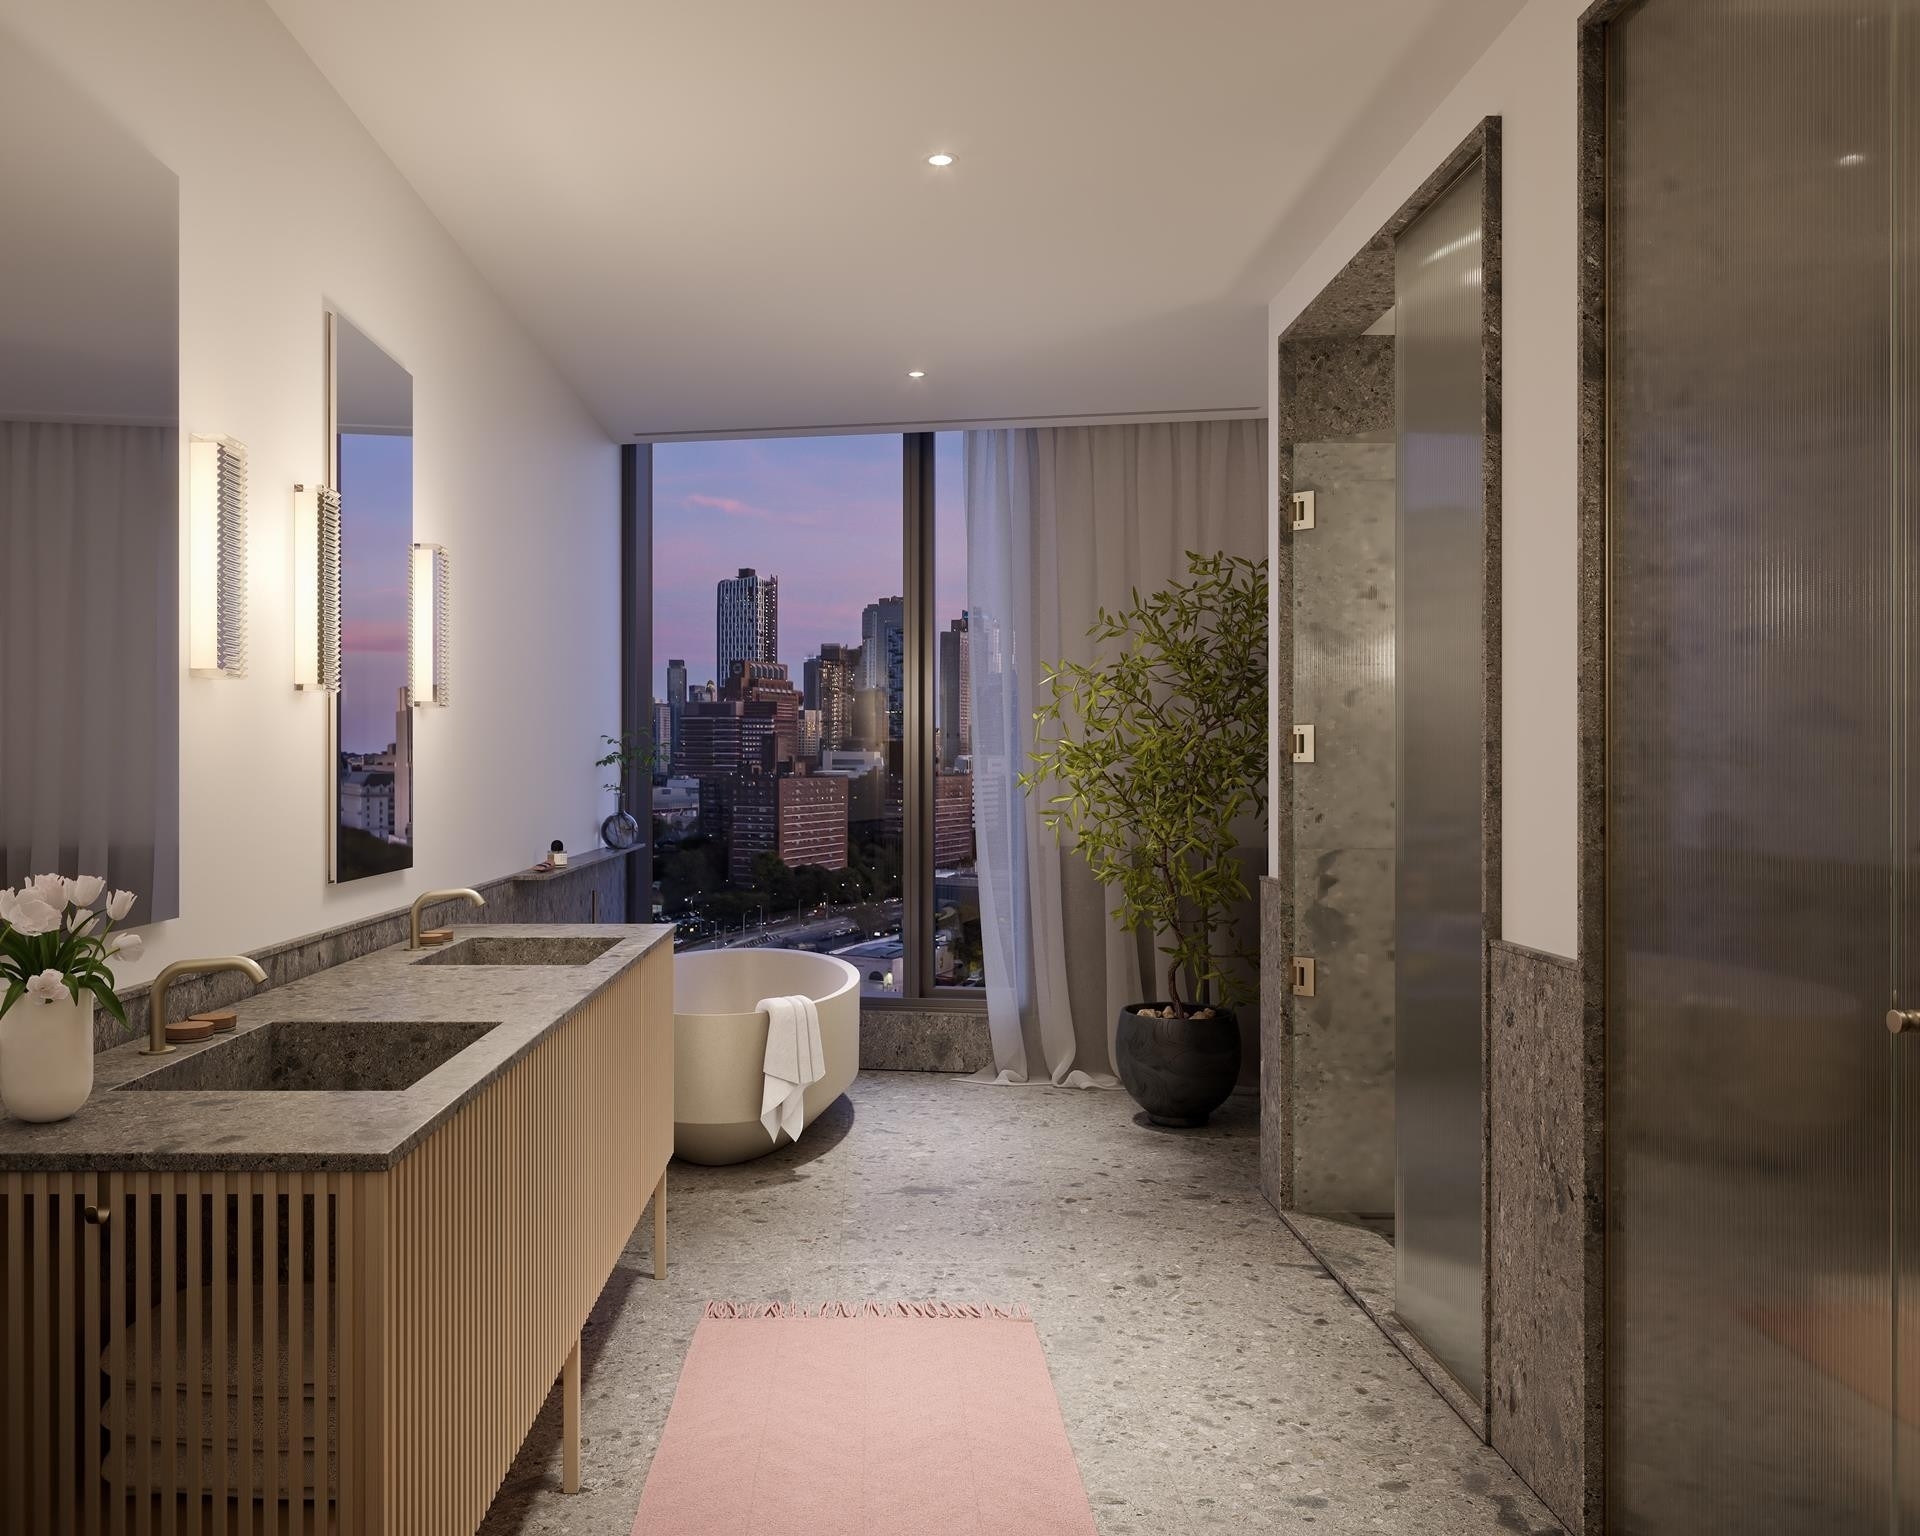 3. Condominiums for Sale at Olympia Dumbo, 30 FRONT ST, 27A Brooklyn, NY 11201